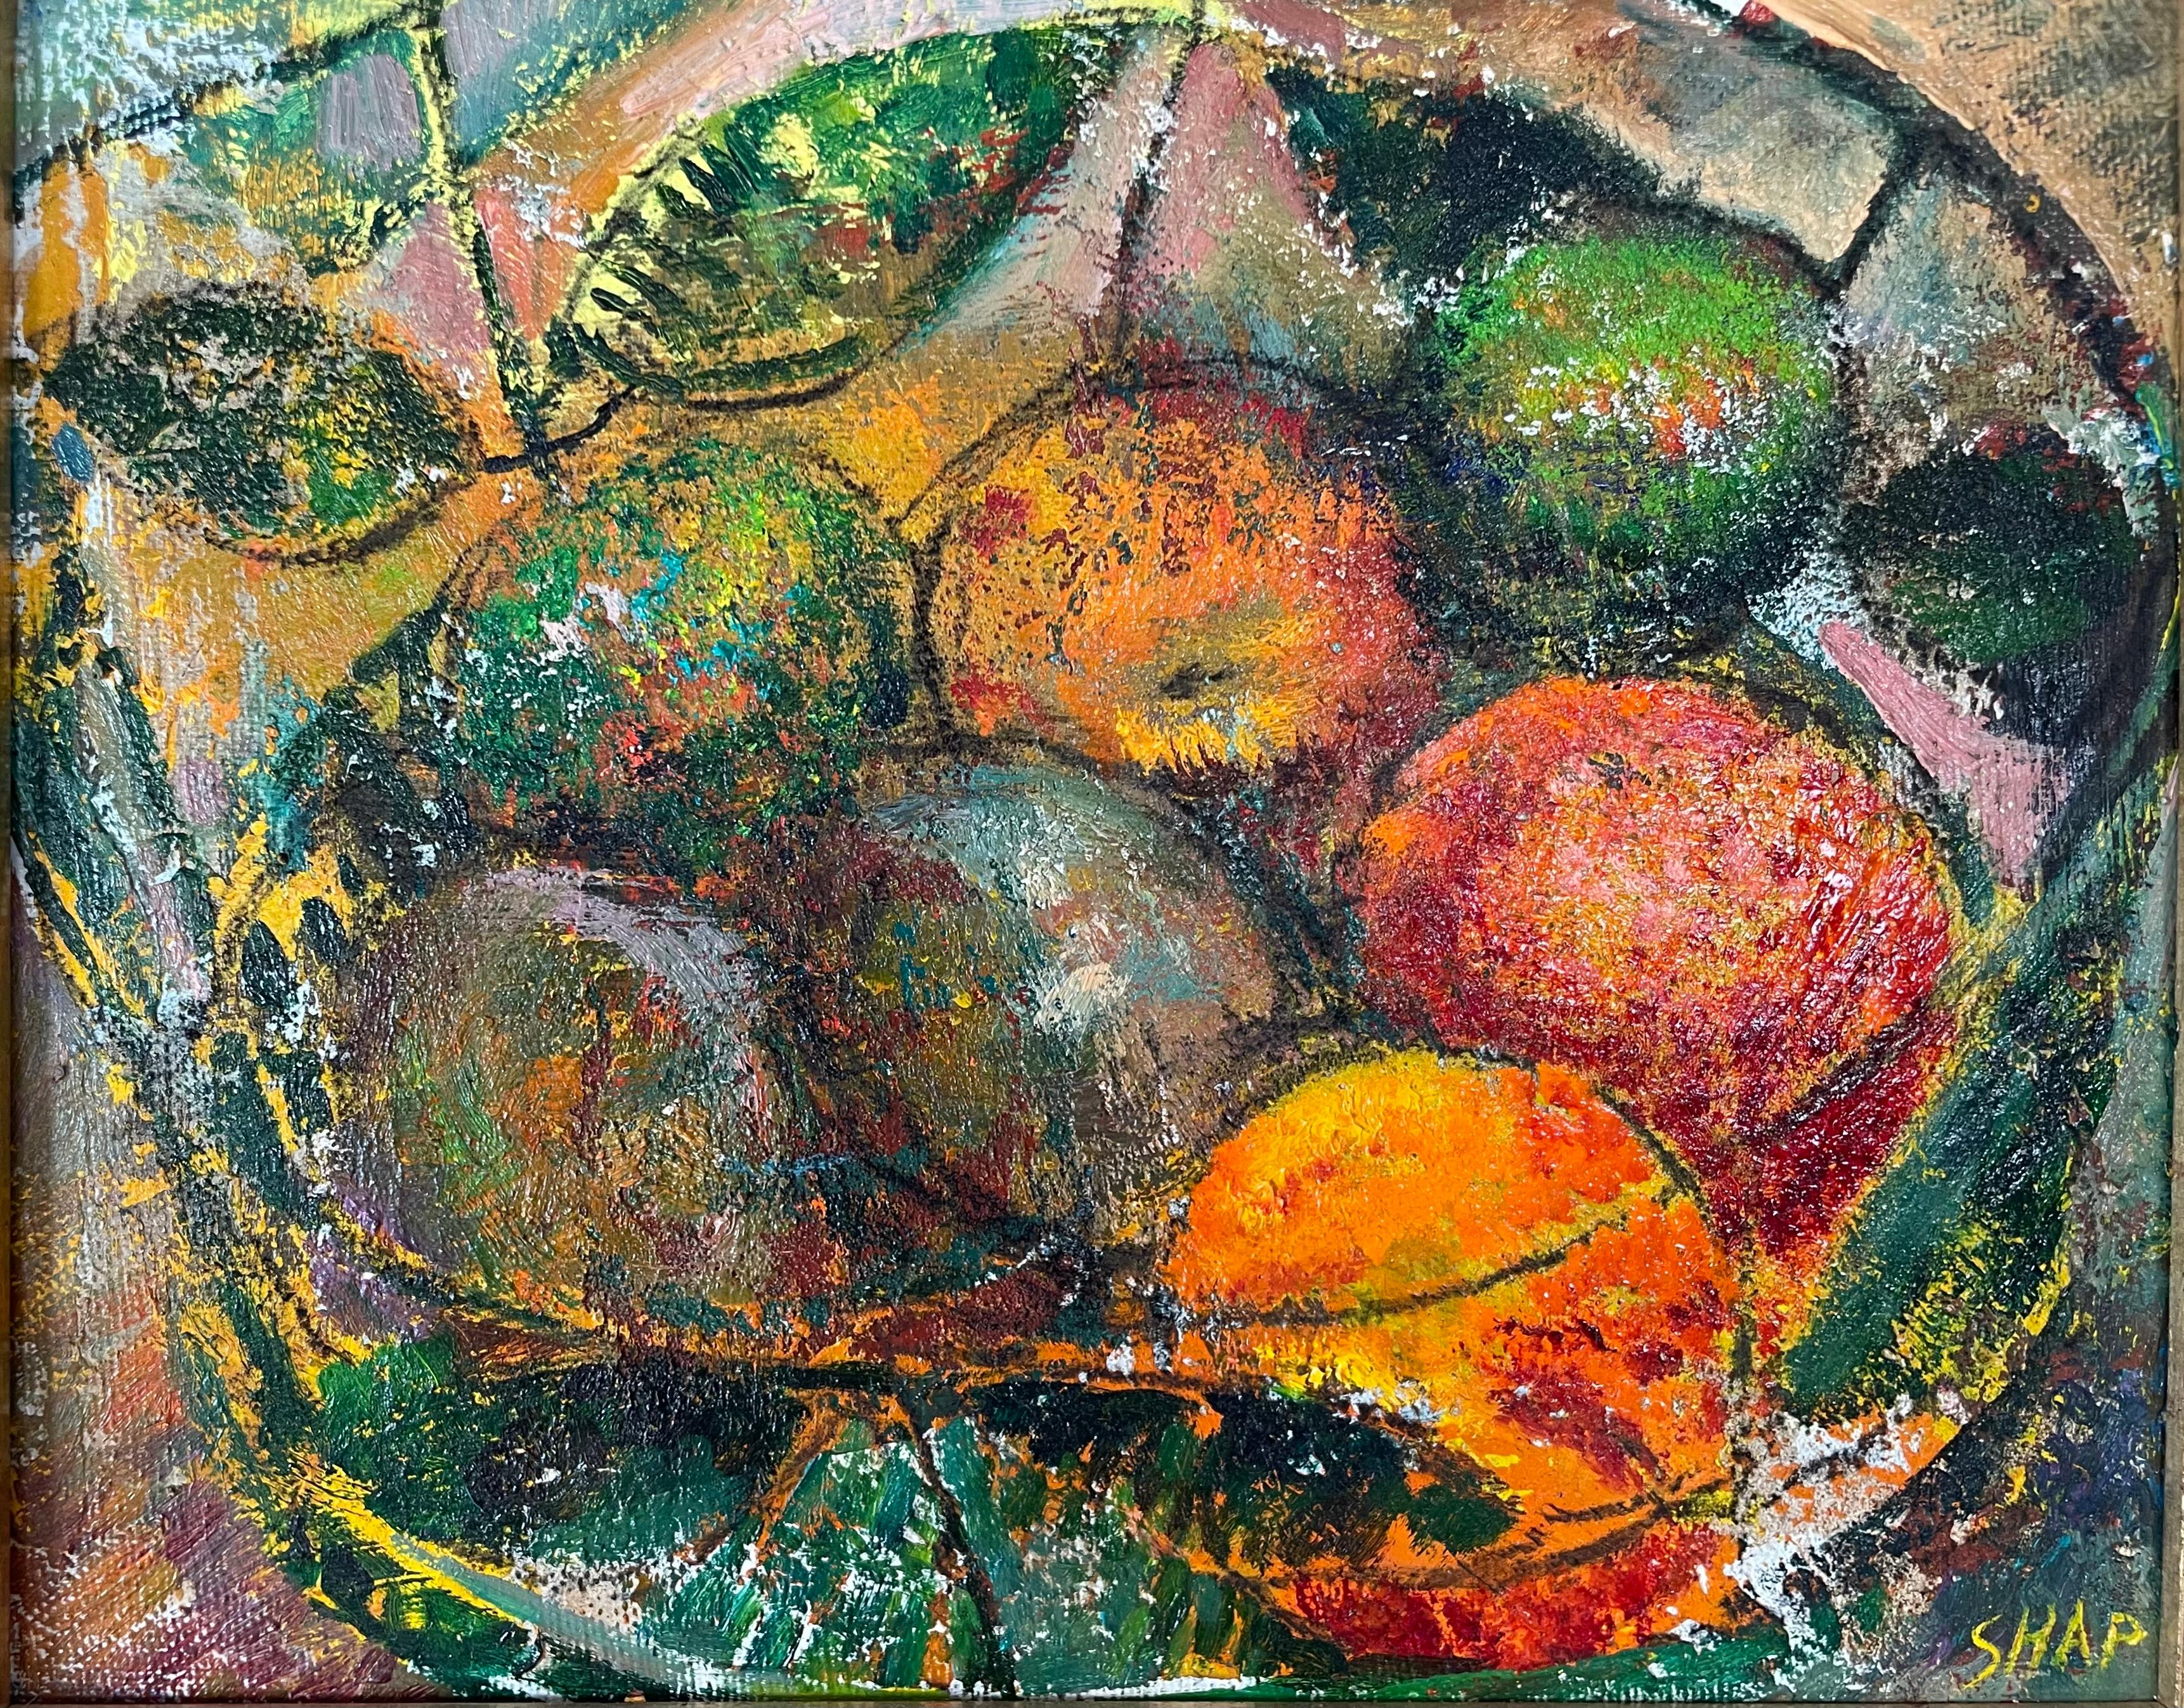 Apples and Avocados  - Neo-Expressionist Painting by Ronald Shap